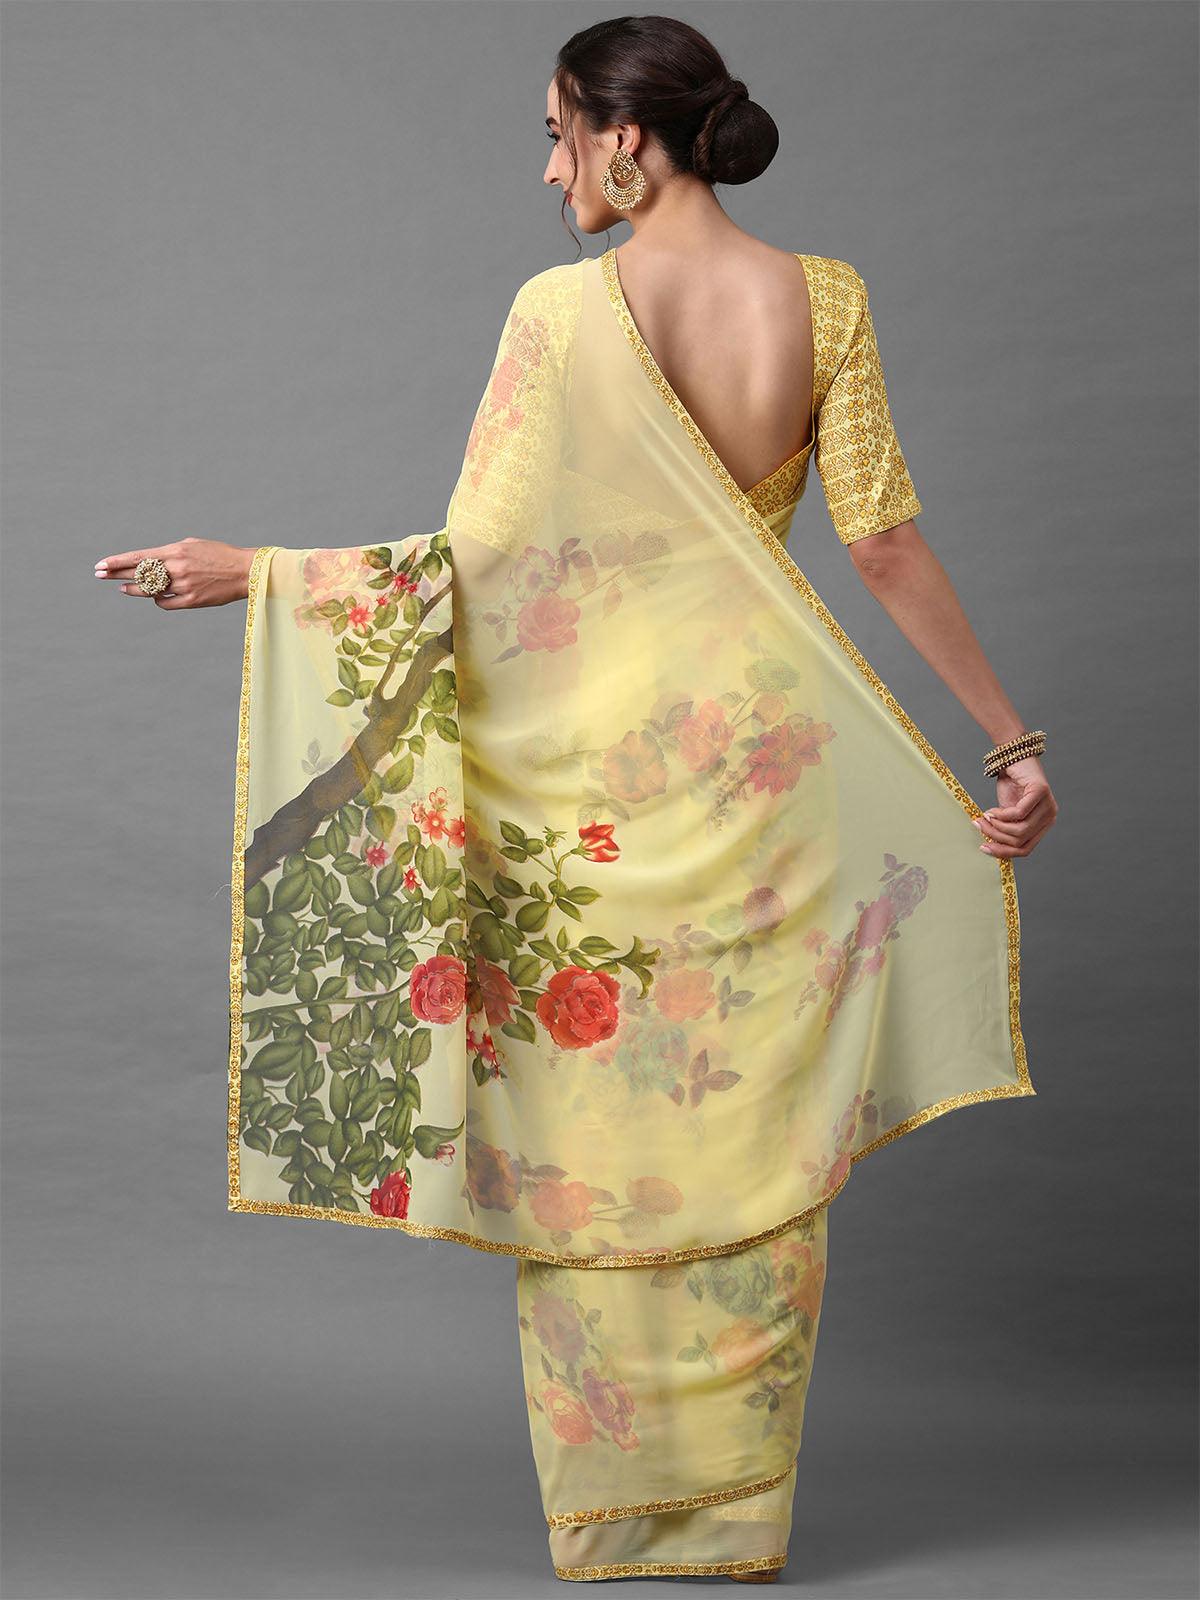 Women's Yellow Festive Georgette Printed Saree With Unstitched Blouse - Odette